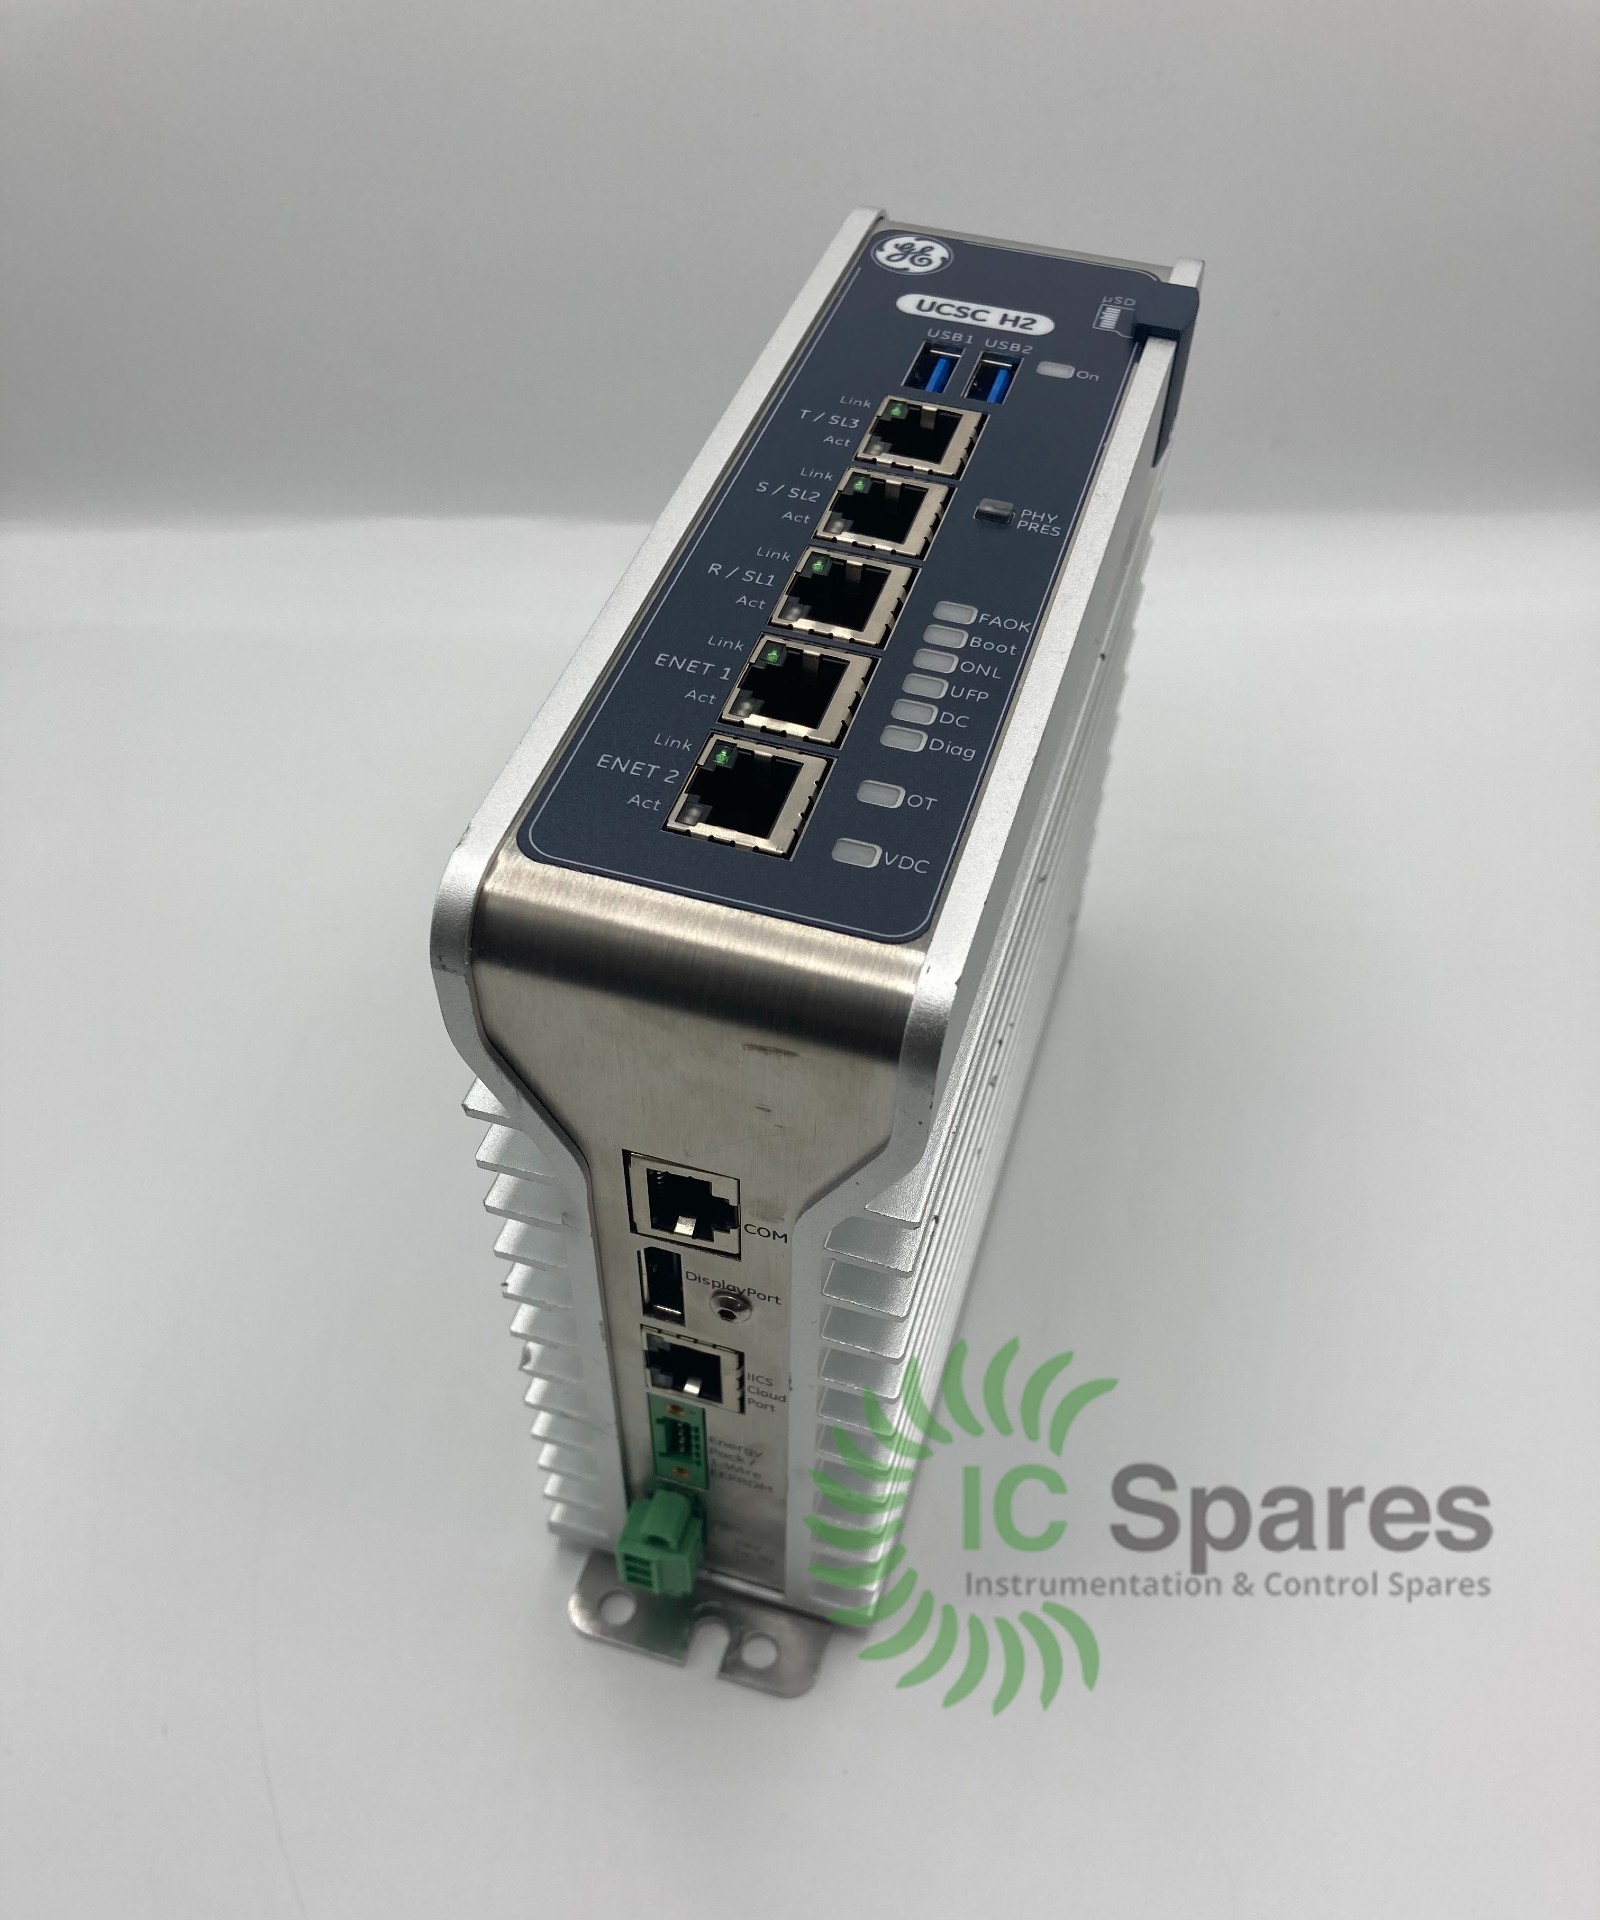 IS420UCSCH1A, GE SPEEDTRONIC™ Turbine Control | IC Spares